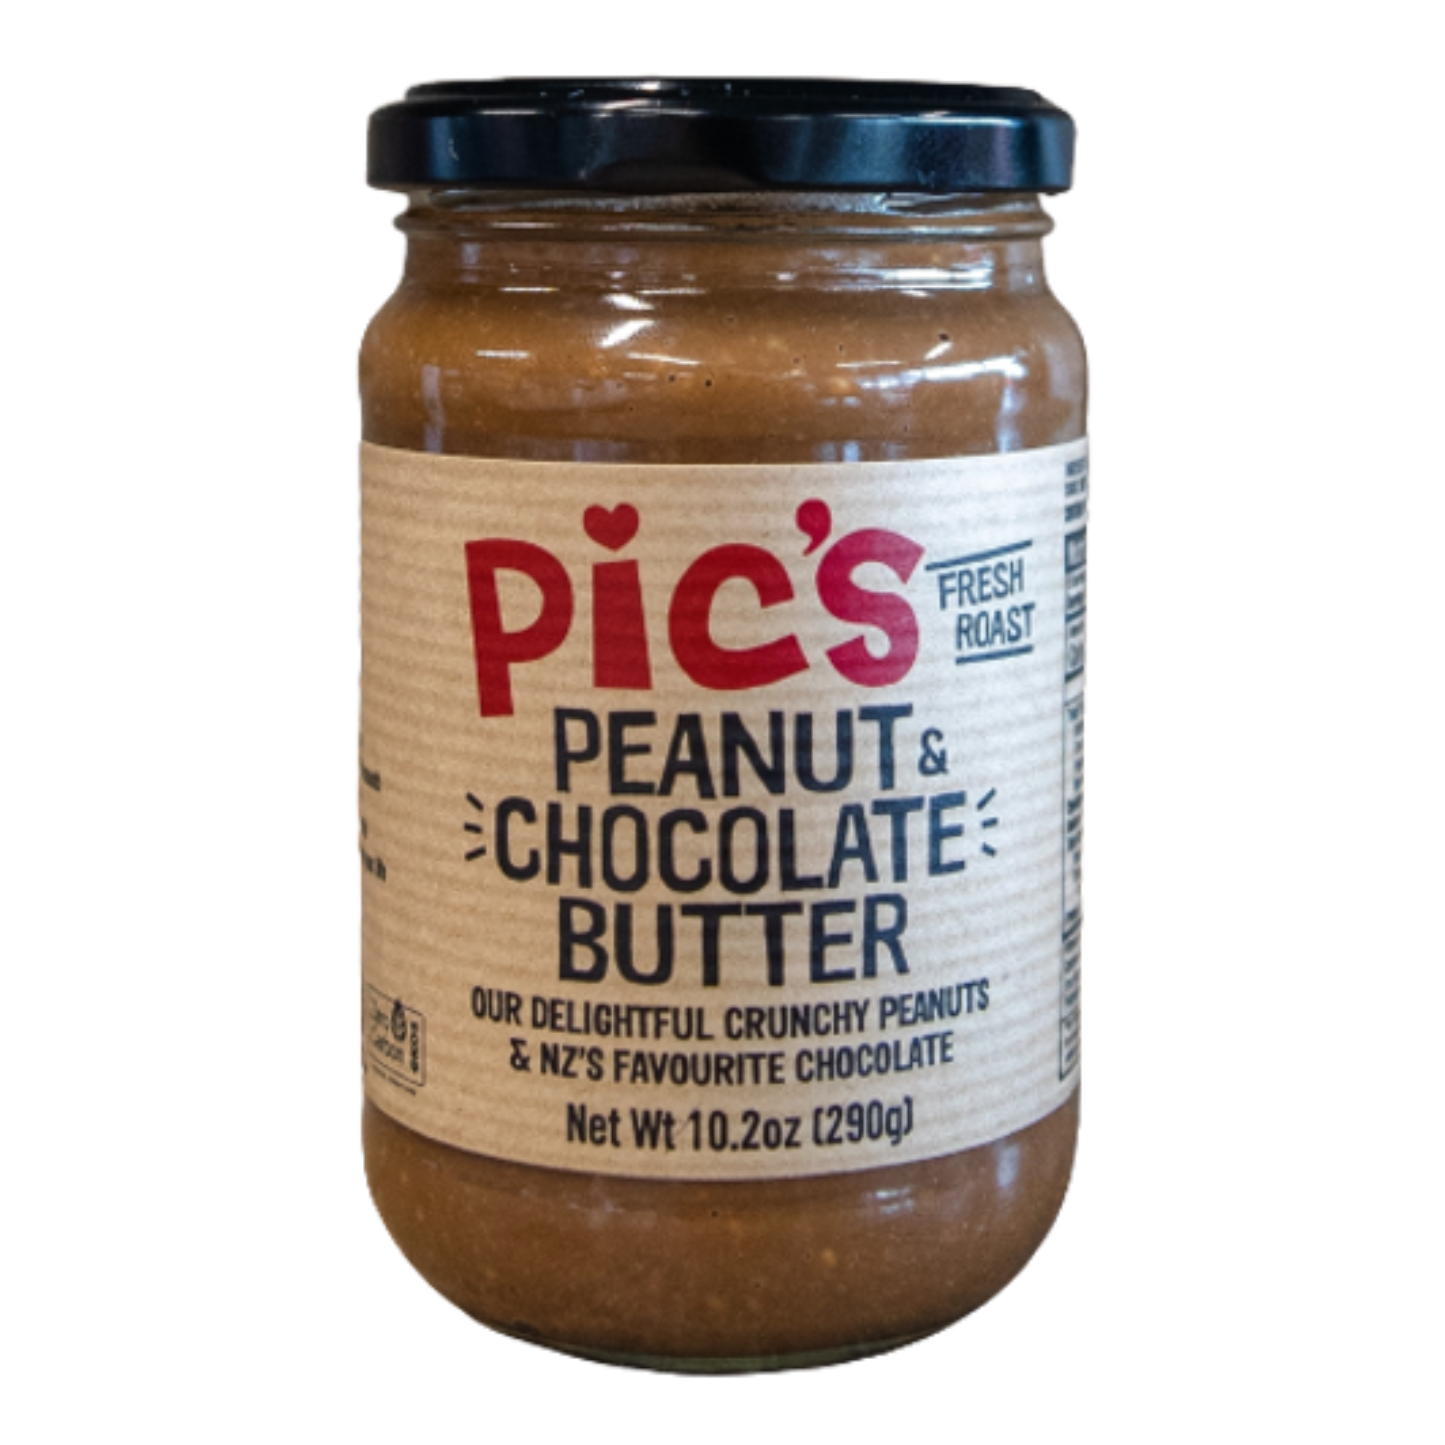 Pic's Peanut Chocolate Butter